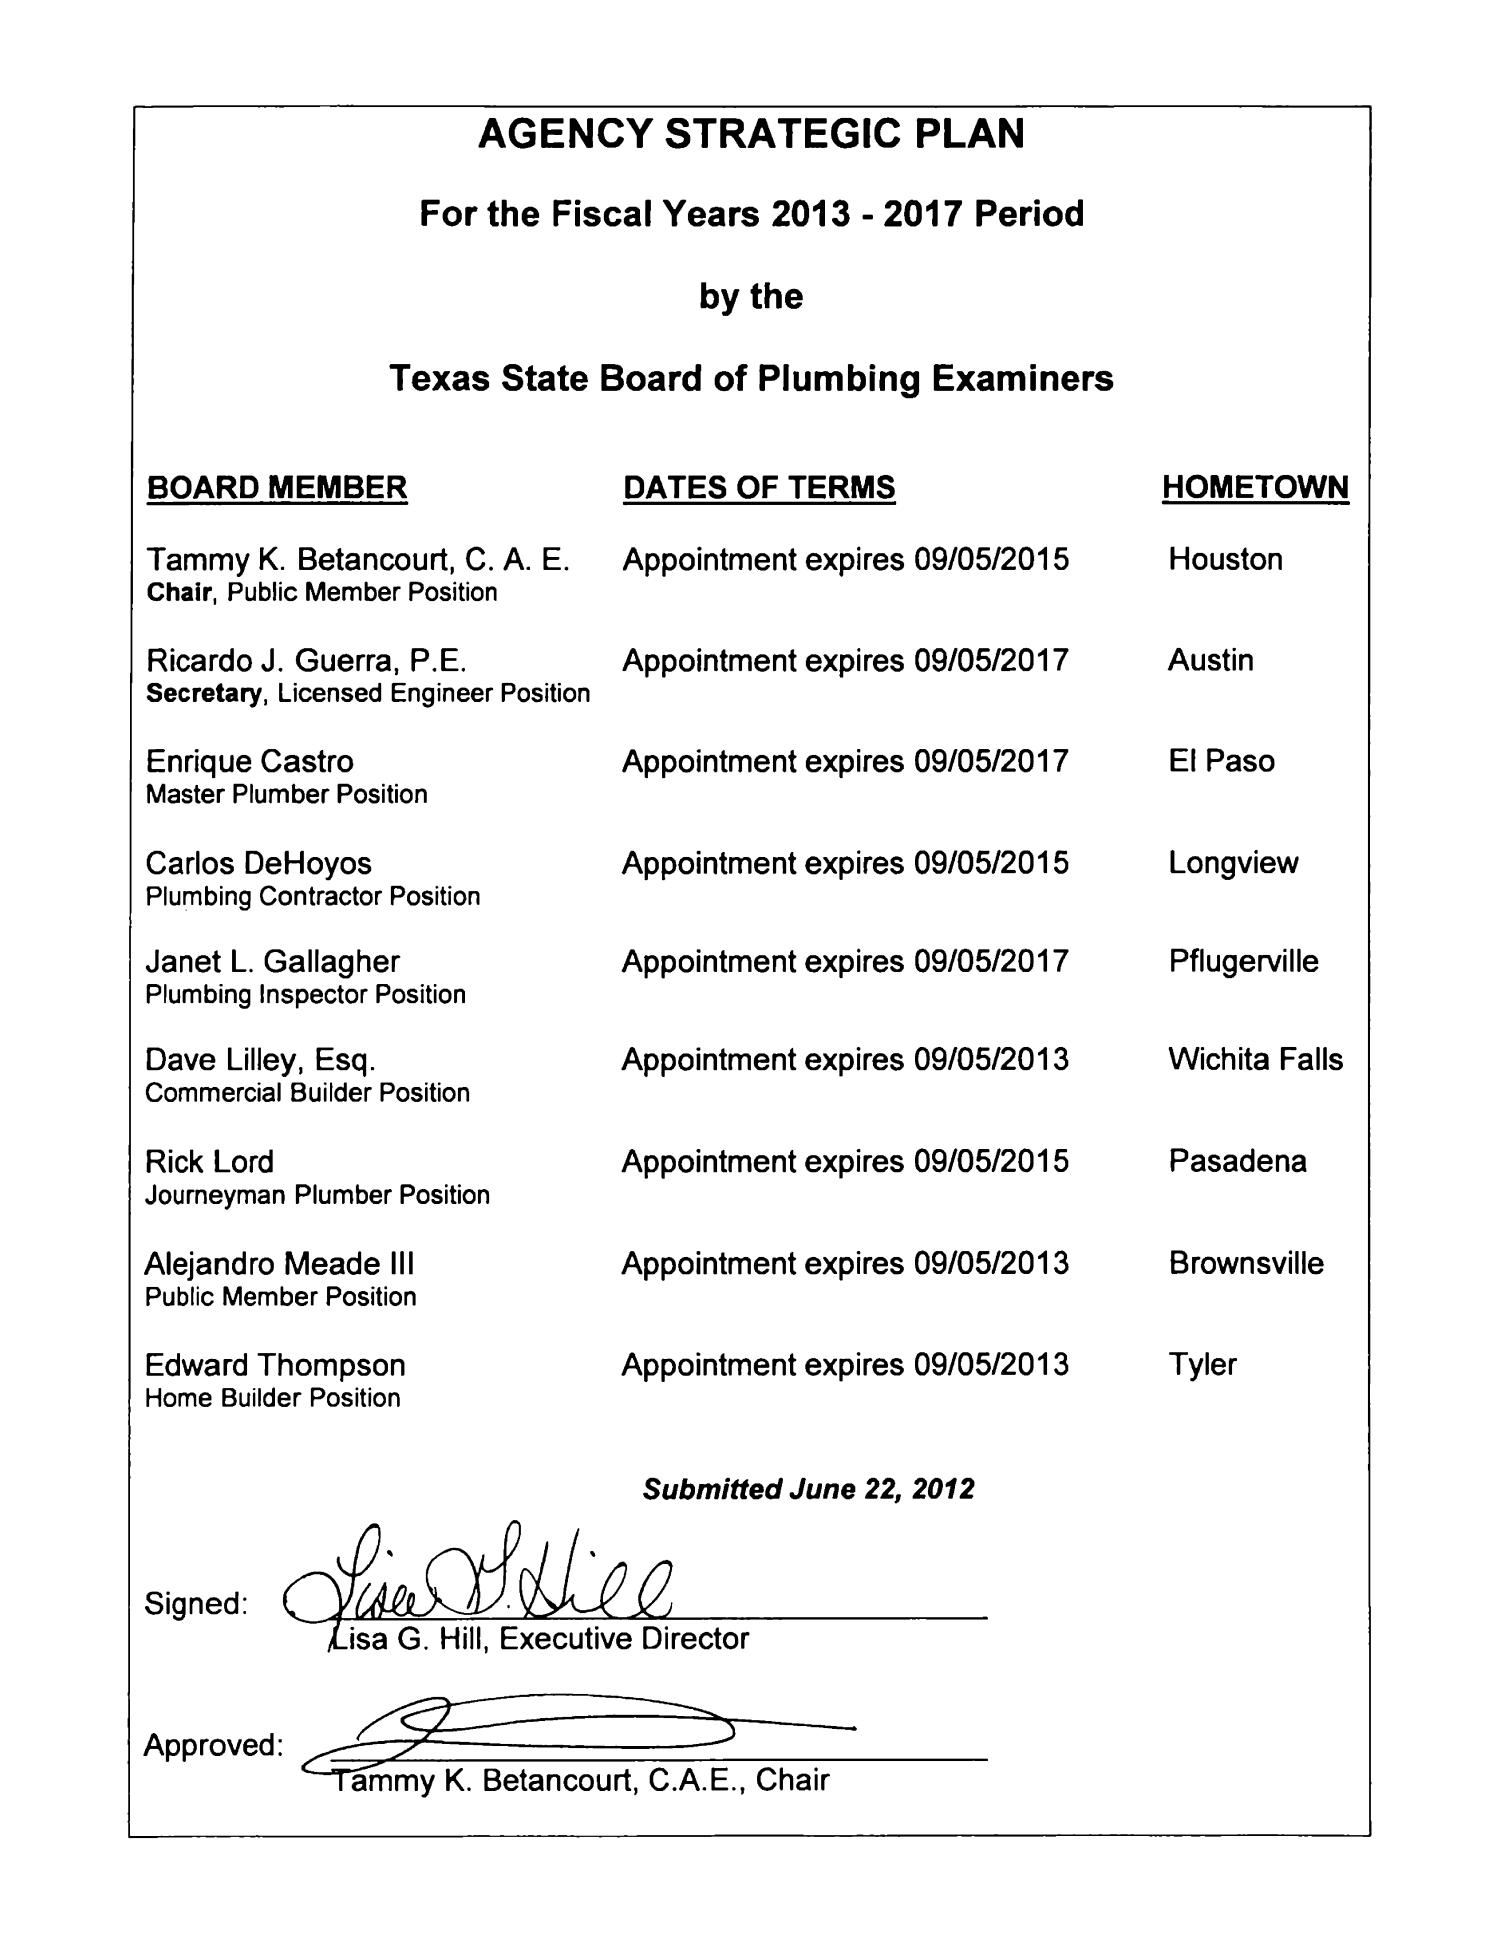 Texas State Board of Plumbing Examiners Strategic Plan: Fiscal Years 2013-2017
                                                
                                                    Title Page
                                                